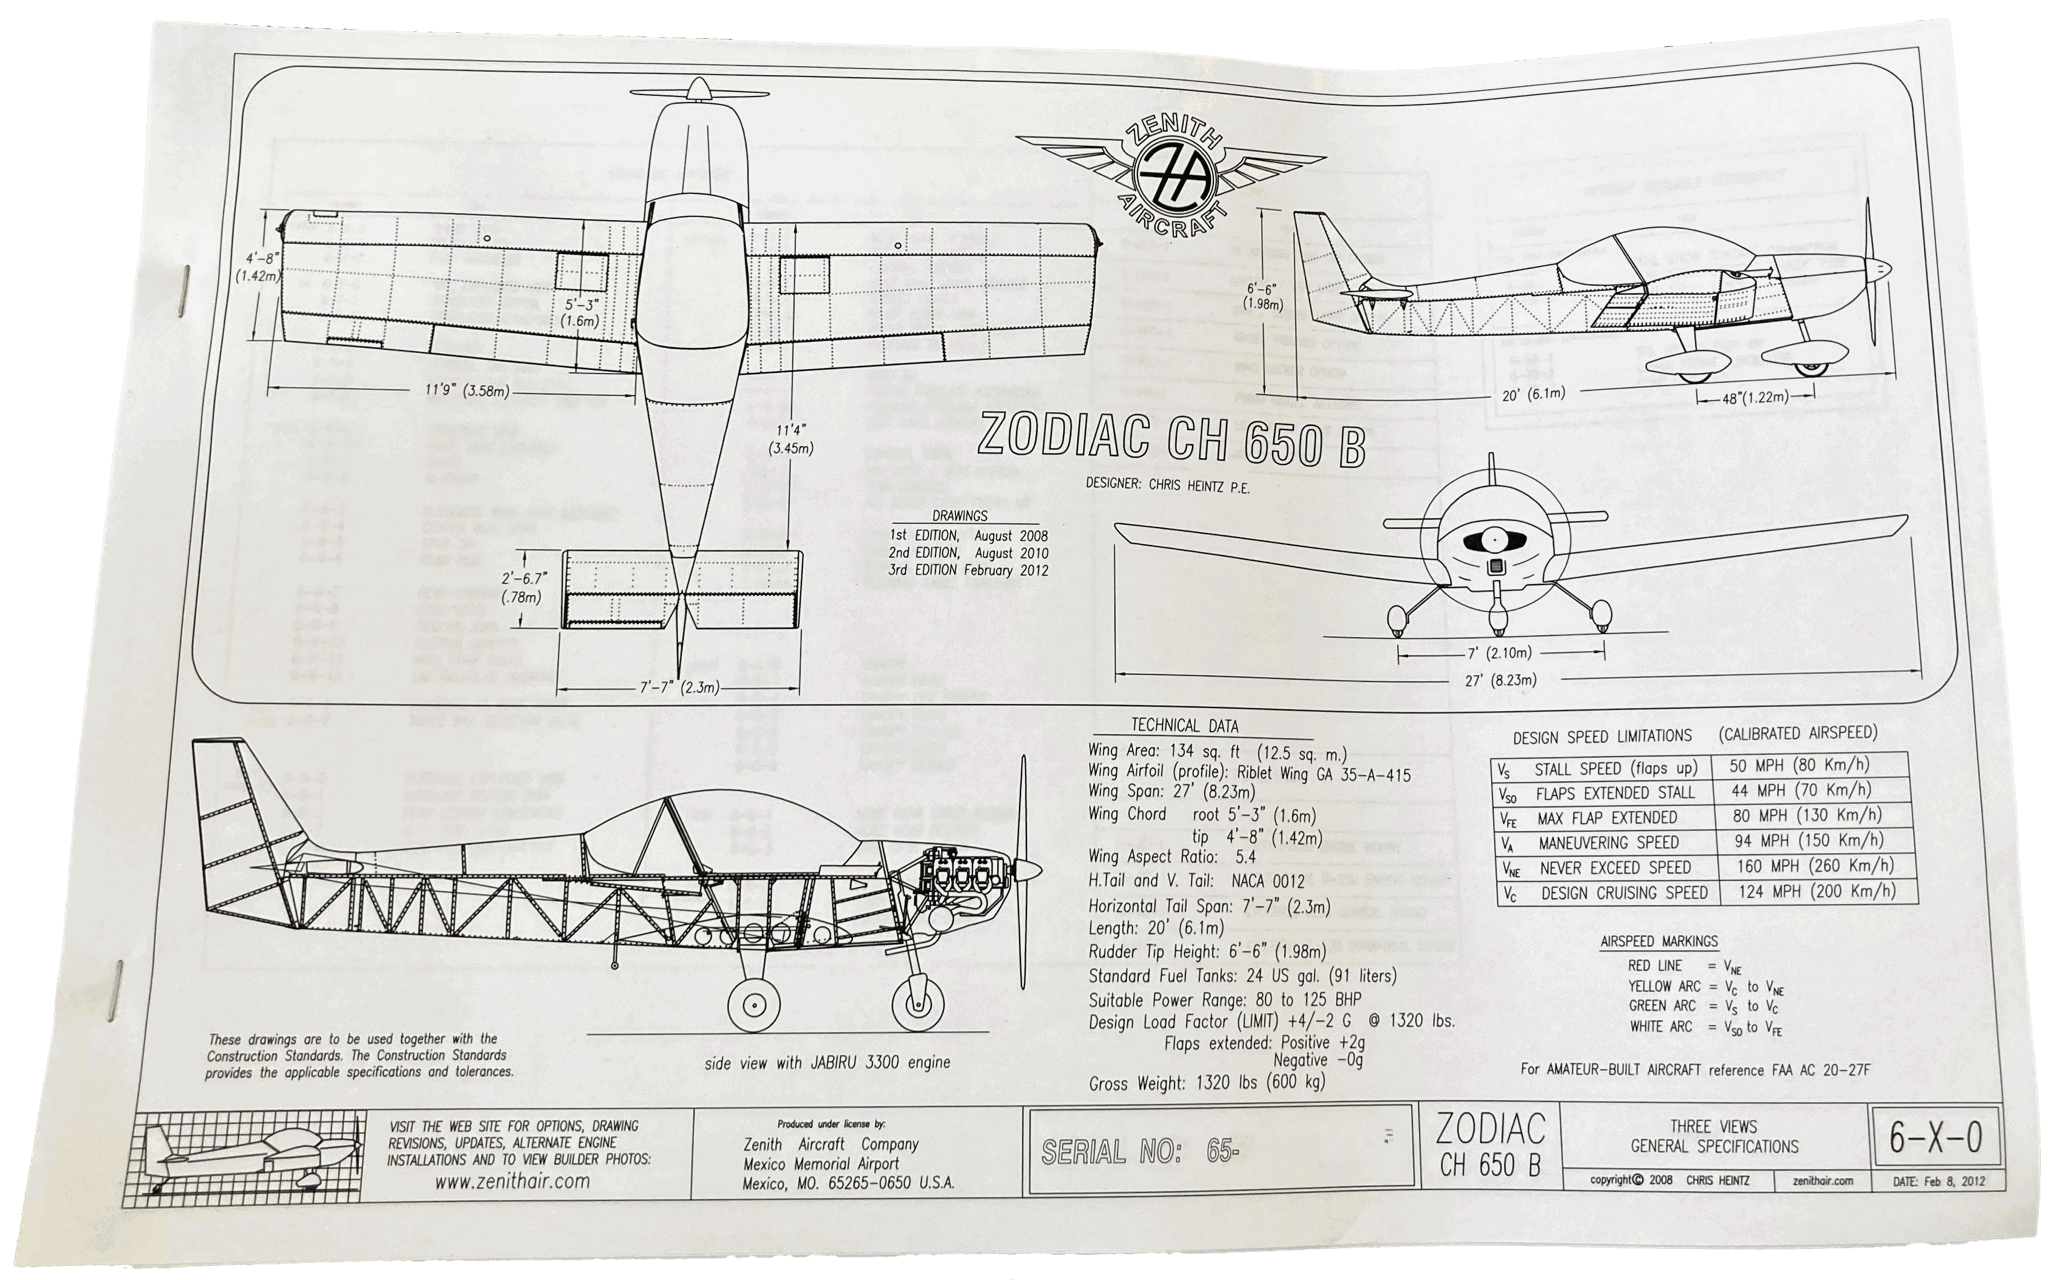 Front page of drawings for Chris Heintz's ZODIAC CH 650 B.